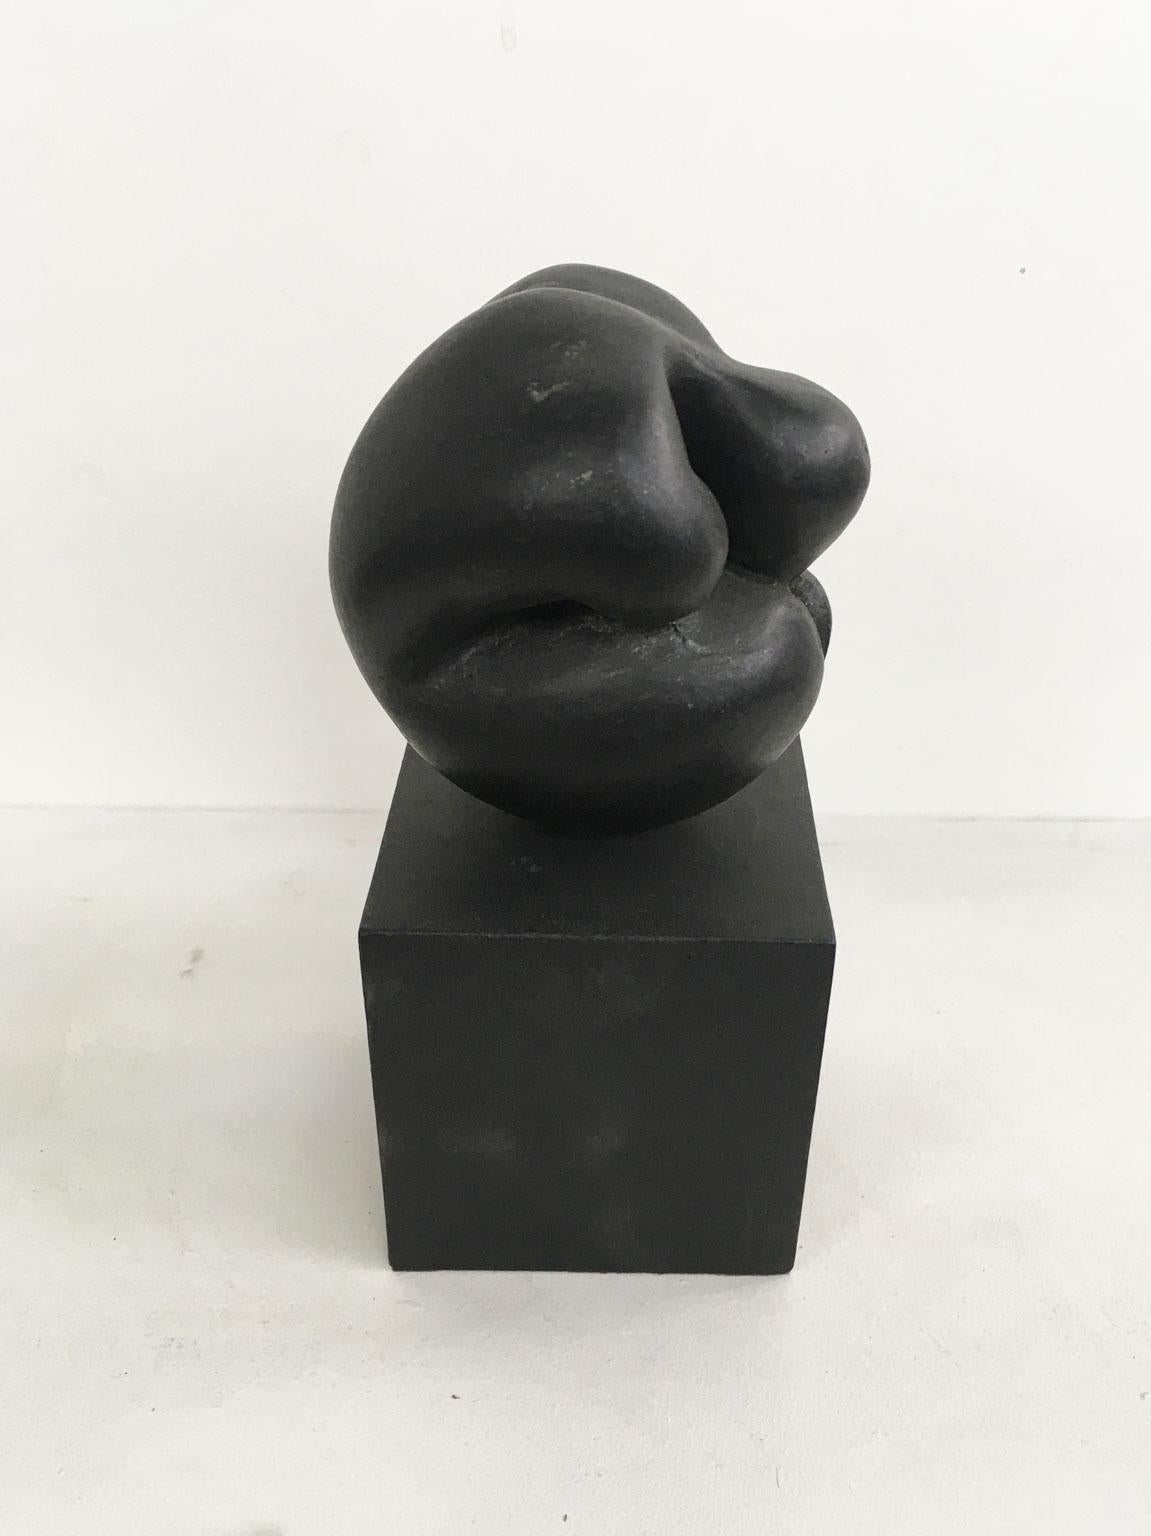 This is an engaging black aluminum sculpture create by the Italian artist Patrizia Guerresi, in the 1988. The piece is a multiple of 1000 specimen on a black wooden base. The title of this artwork is 